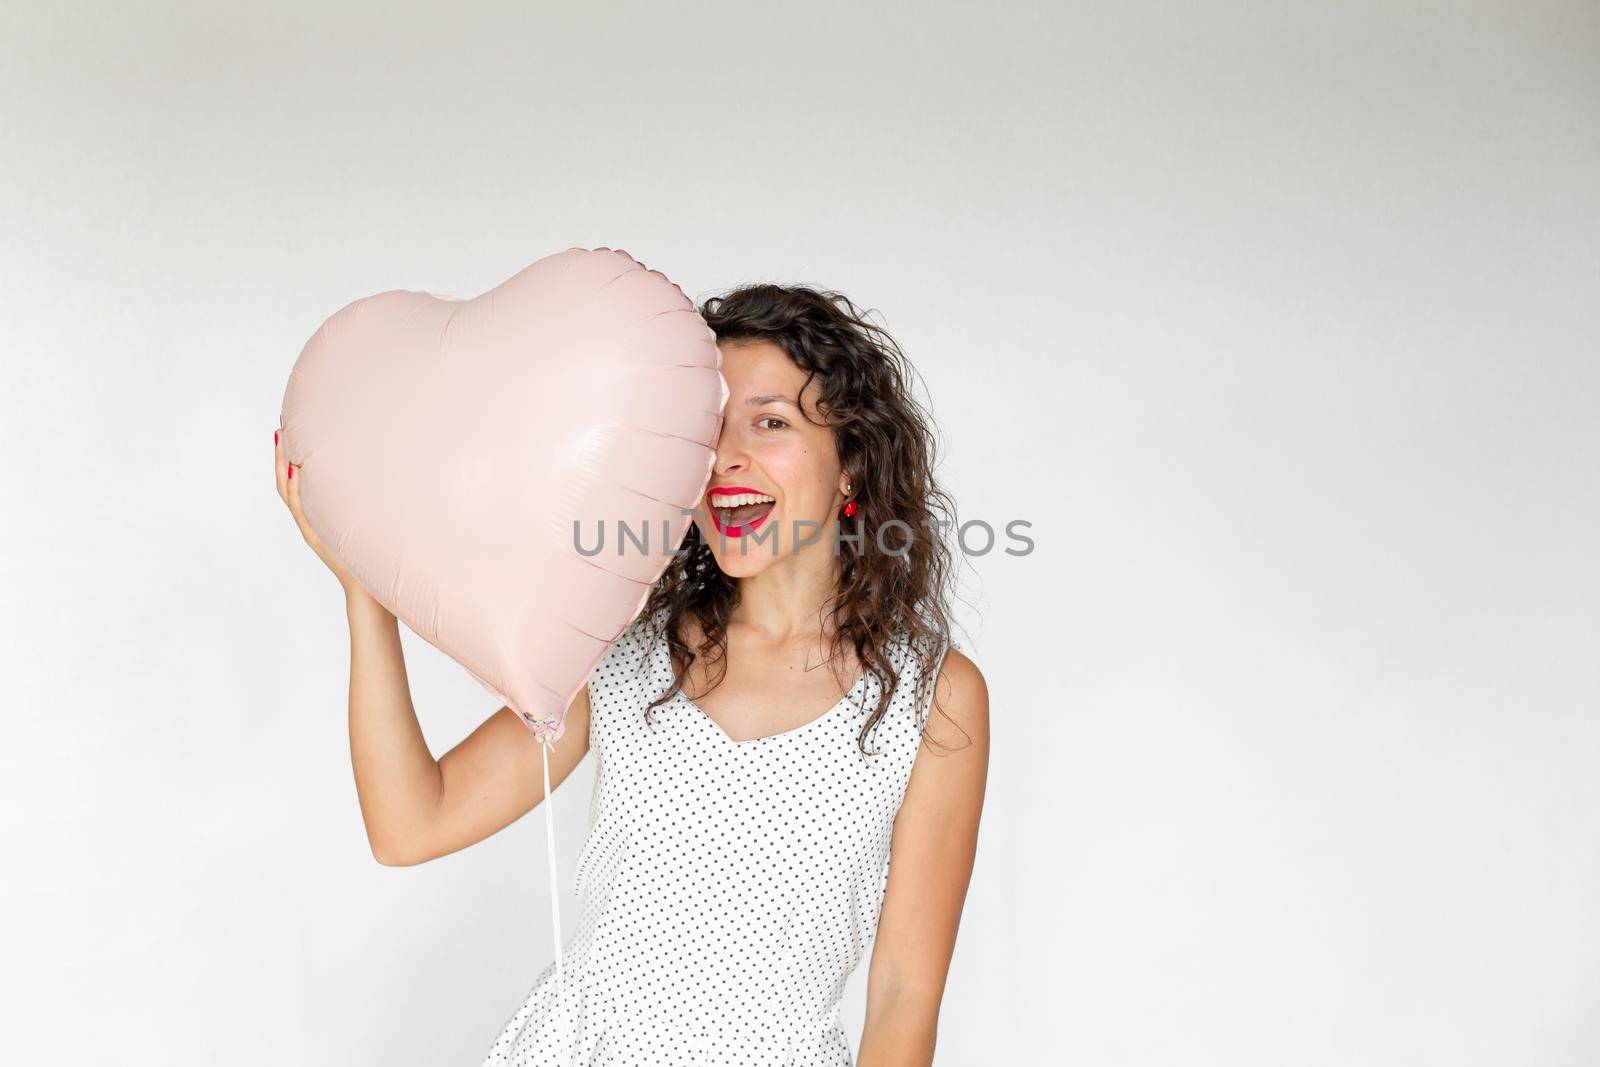 Sexy brunette girl posing with heart-shaped balloons on a white background by Try_my_best